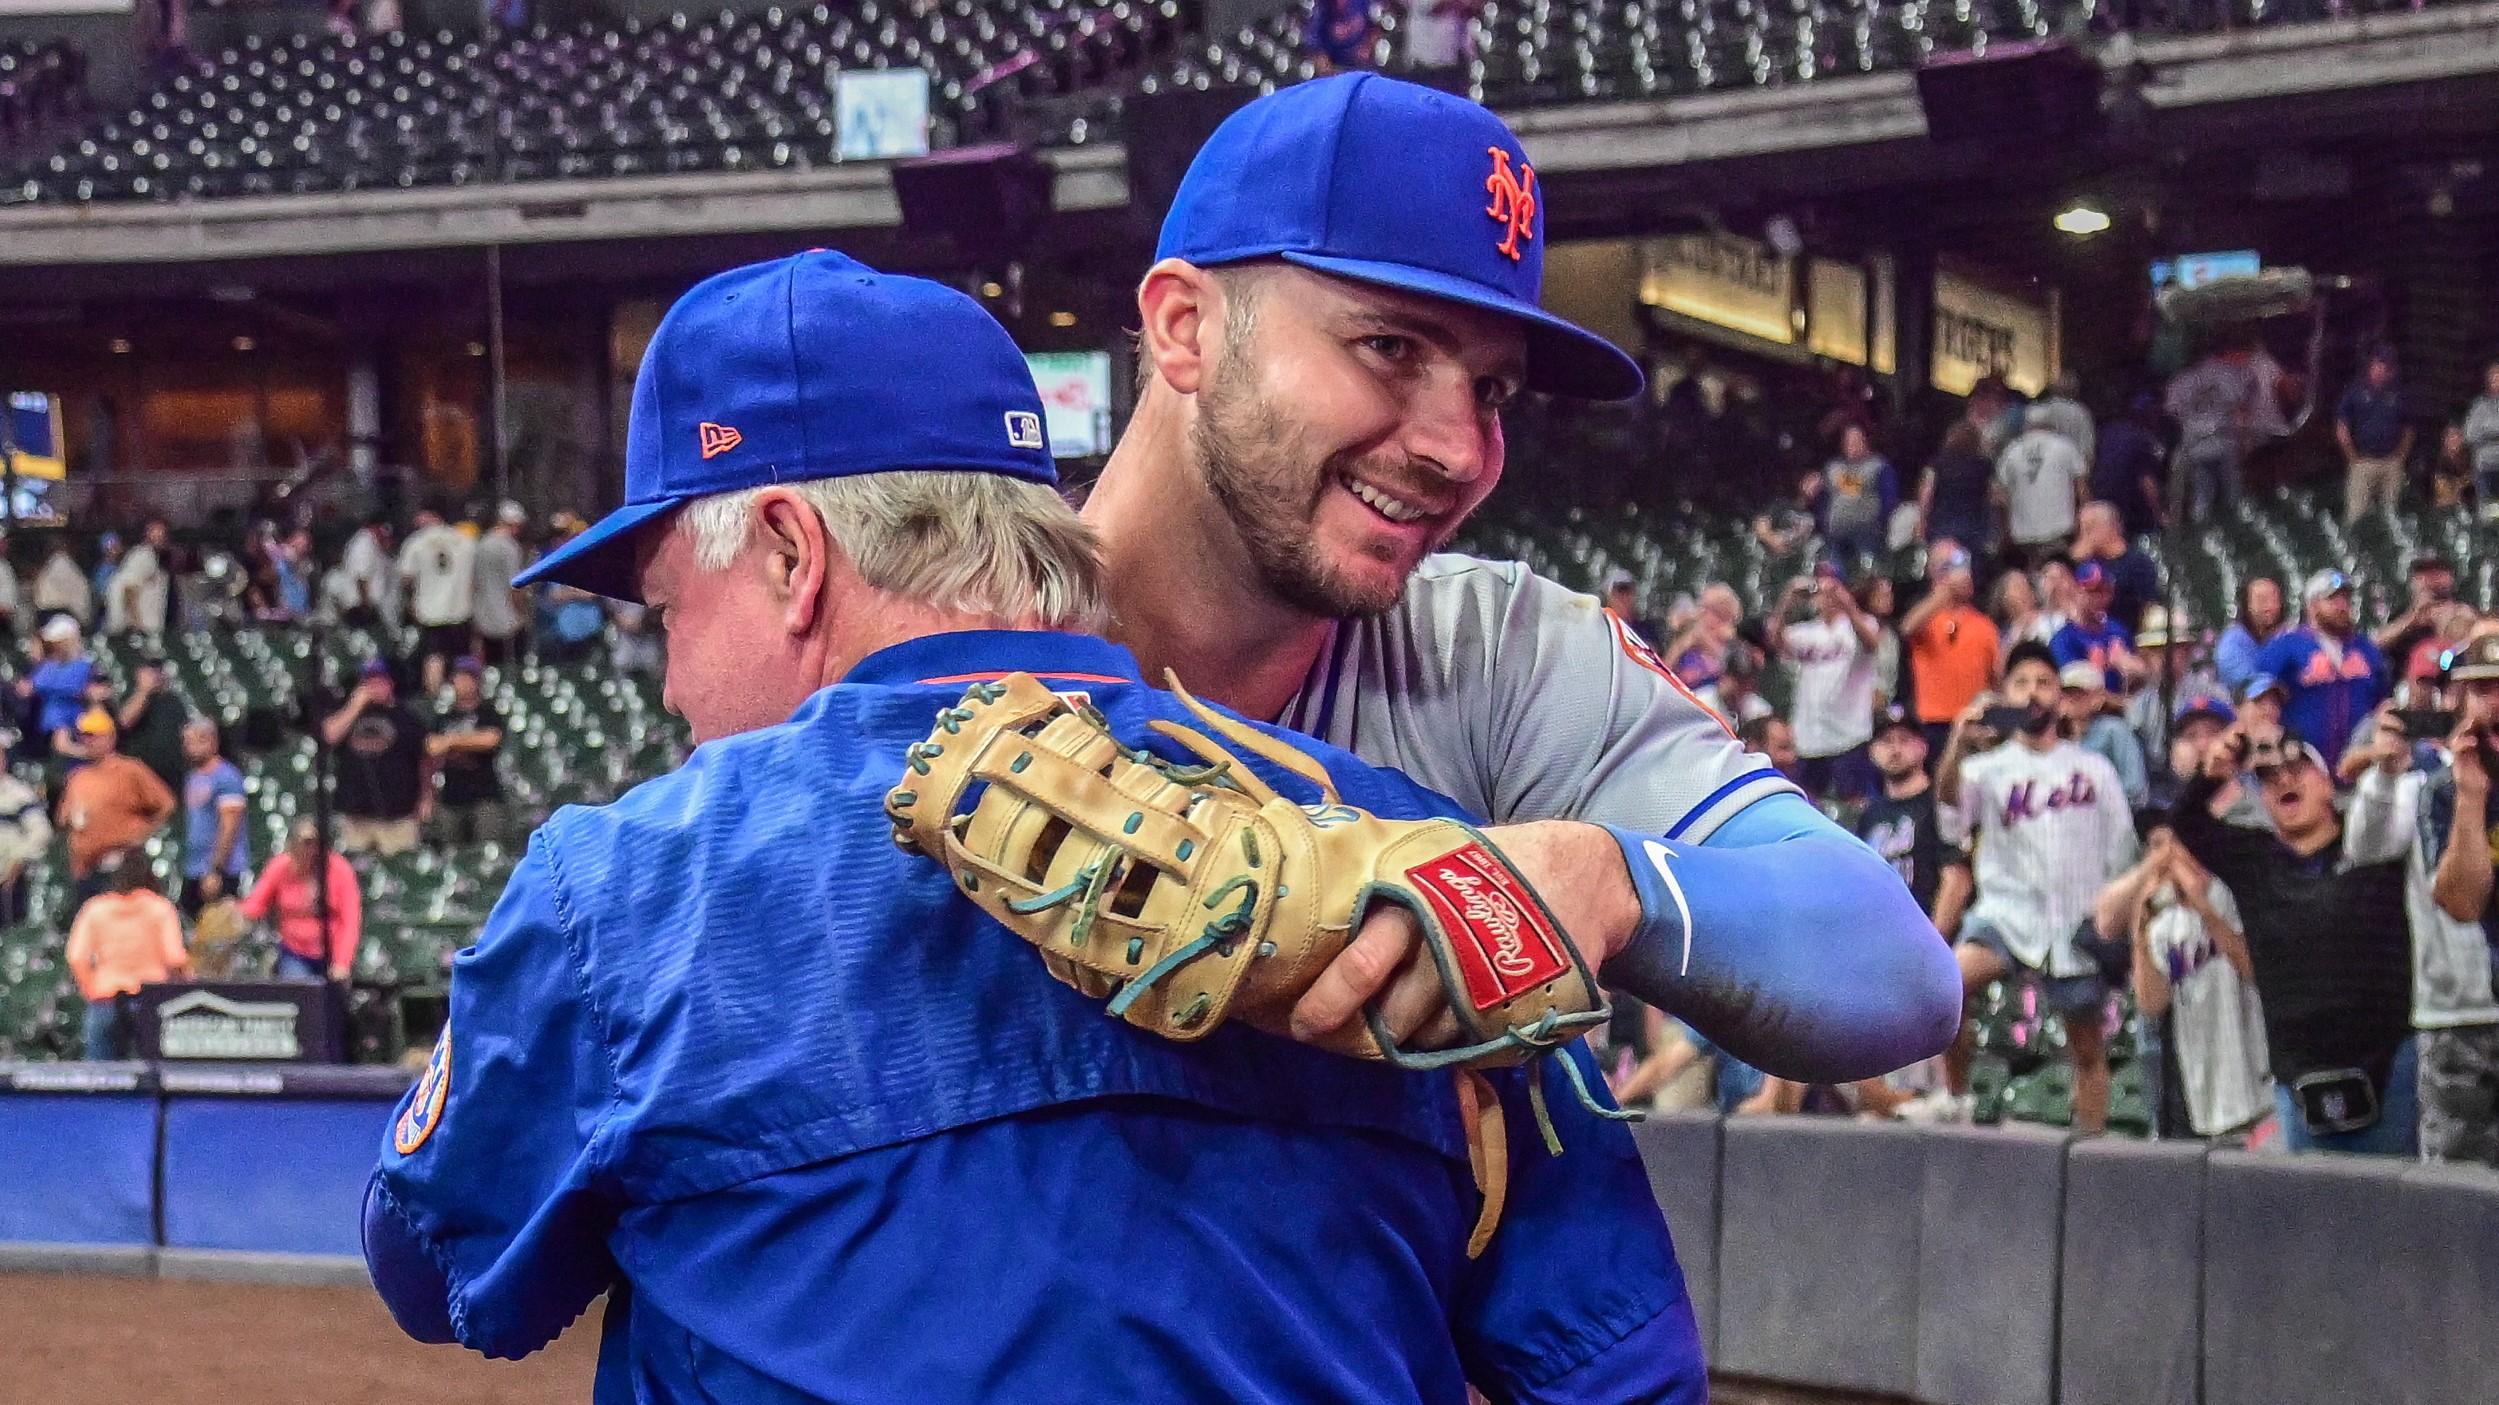 Sep 19, 2022; Milwaukee, Wisconsin, USA; New York Mets first baseman Pete Alonso (20) hugs manager Buck Showalter after the Mets clinched a playoff spot by beating the Milwaukee Brewers at American Family Field. Mandatory Credit: Benny Sieu-USA TODAY Sports / © Benny Sieu-USA TODAY Sports